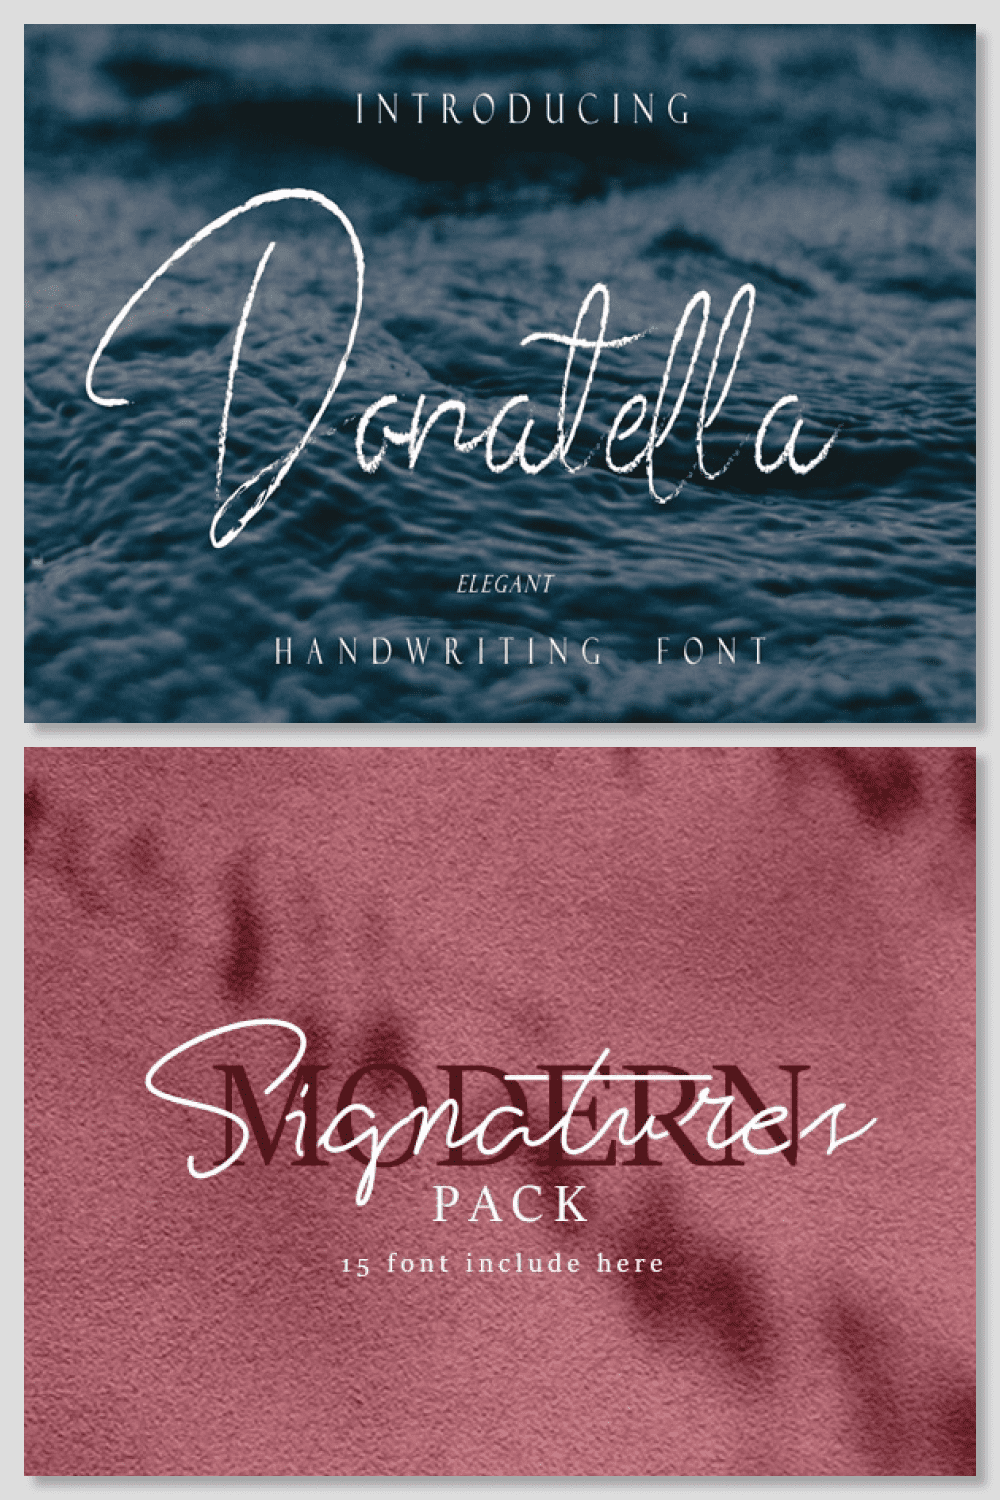  Modern Signature Fonts example images.